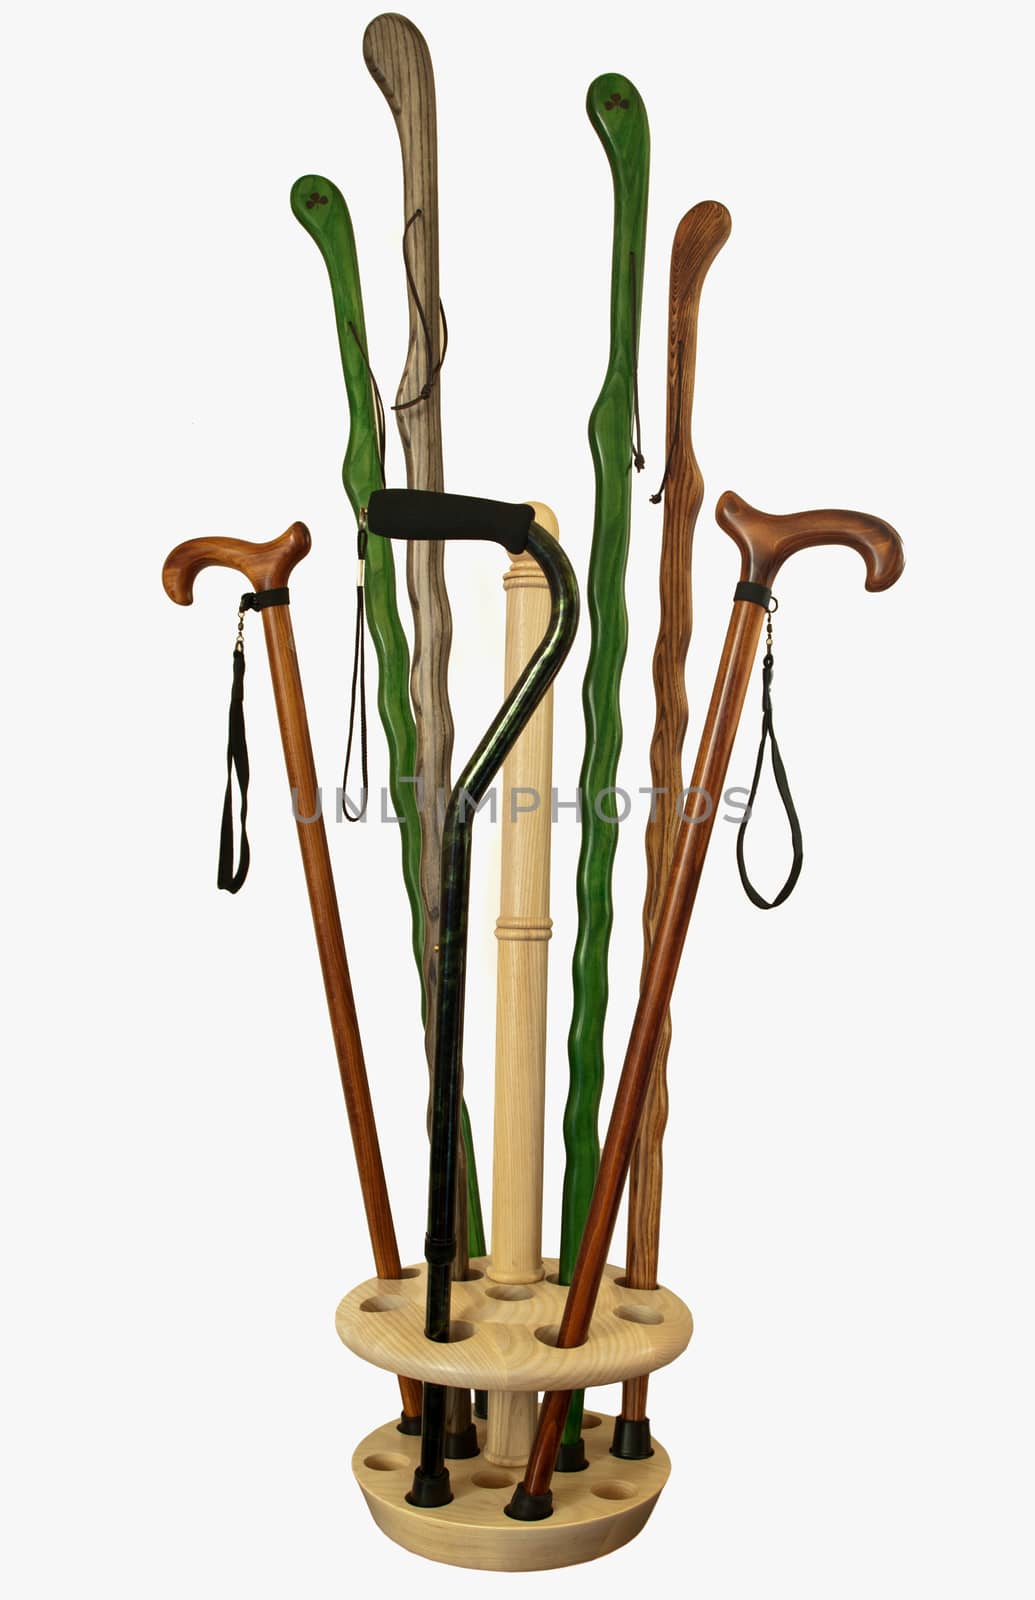 canes and walking sticks by debramillet